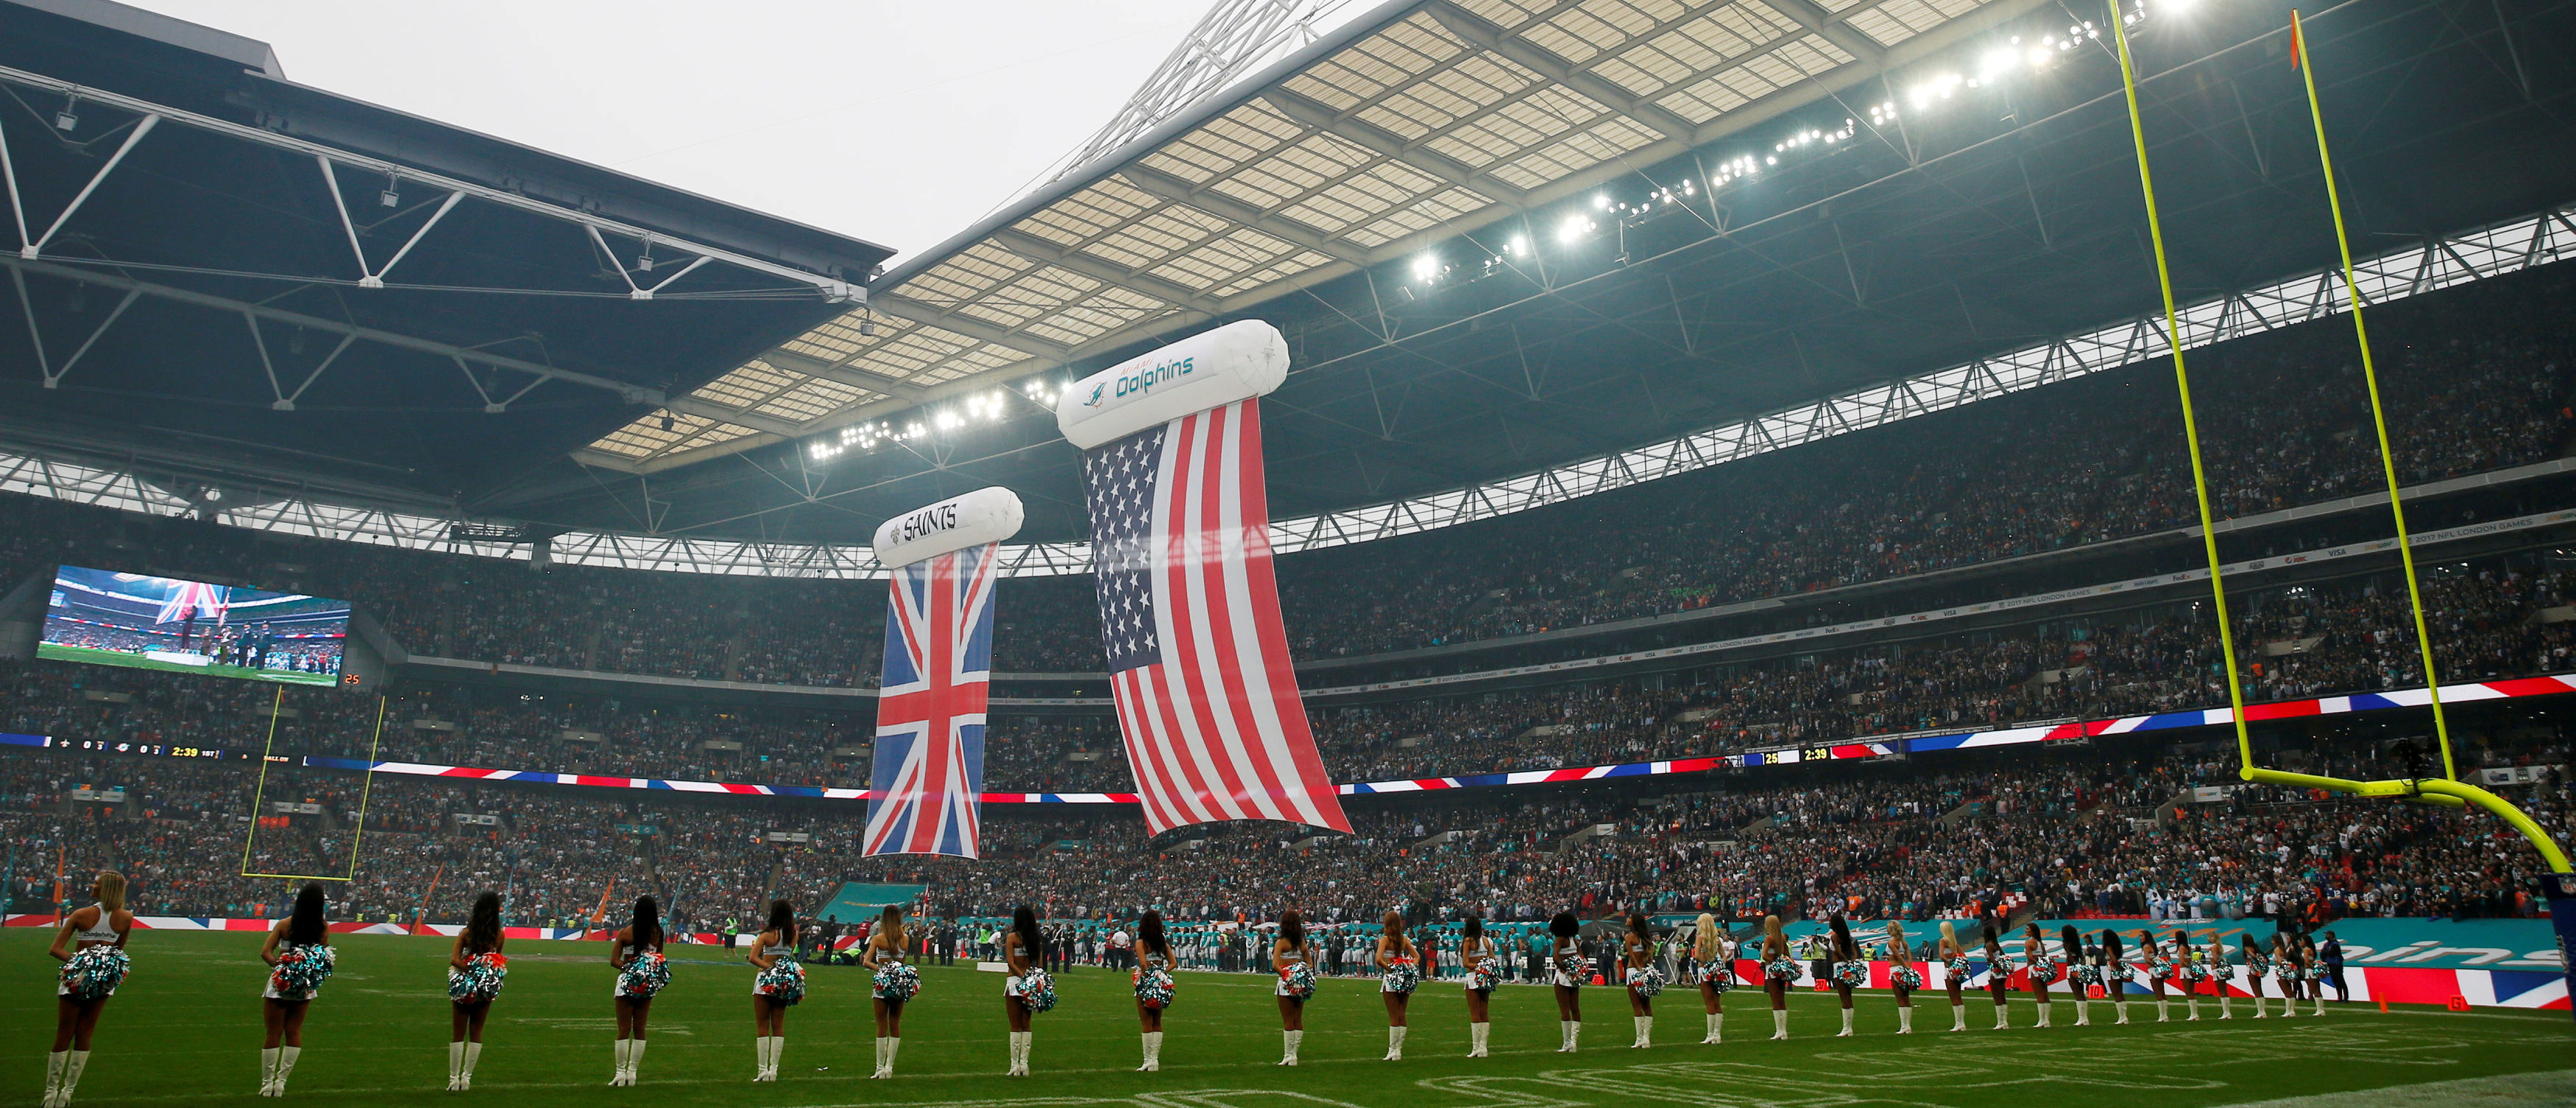 NFL Owner Confirms He Wants To Buy London’s Wembley Stadium The Daily